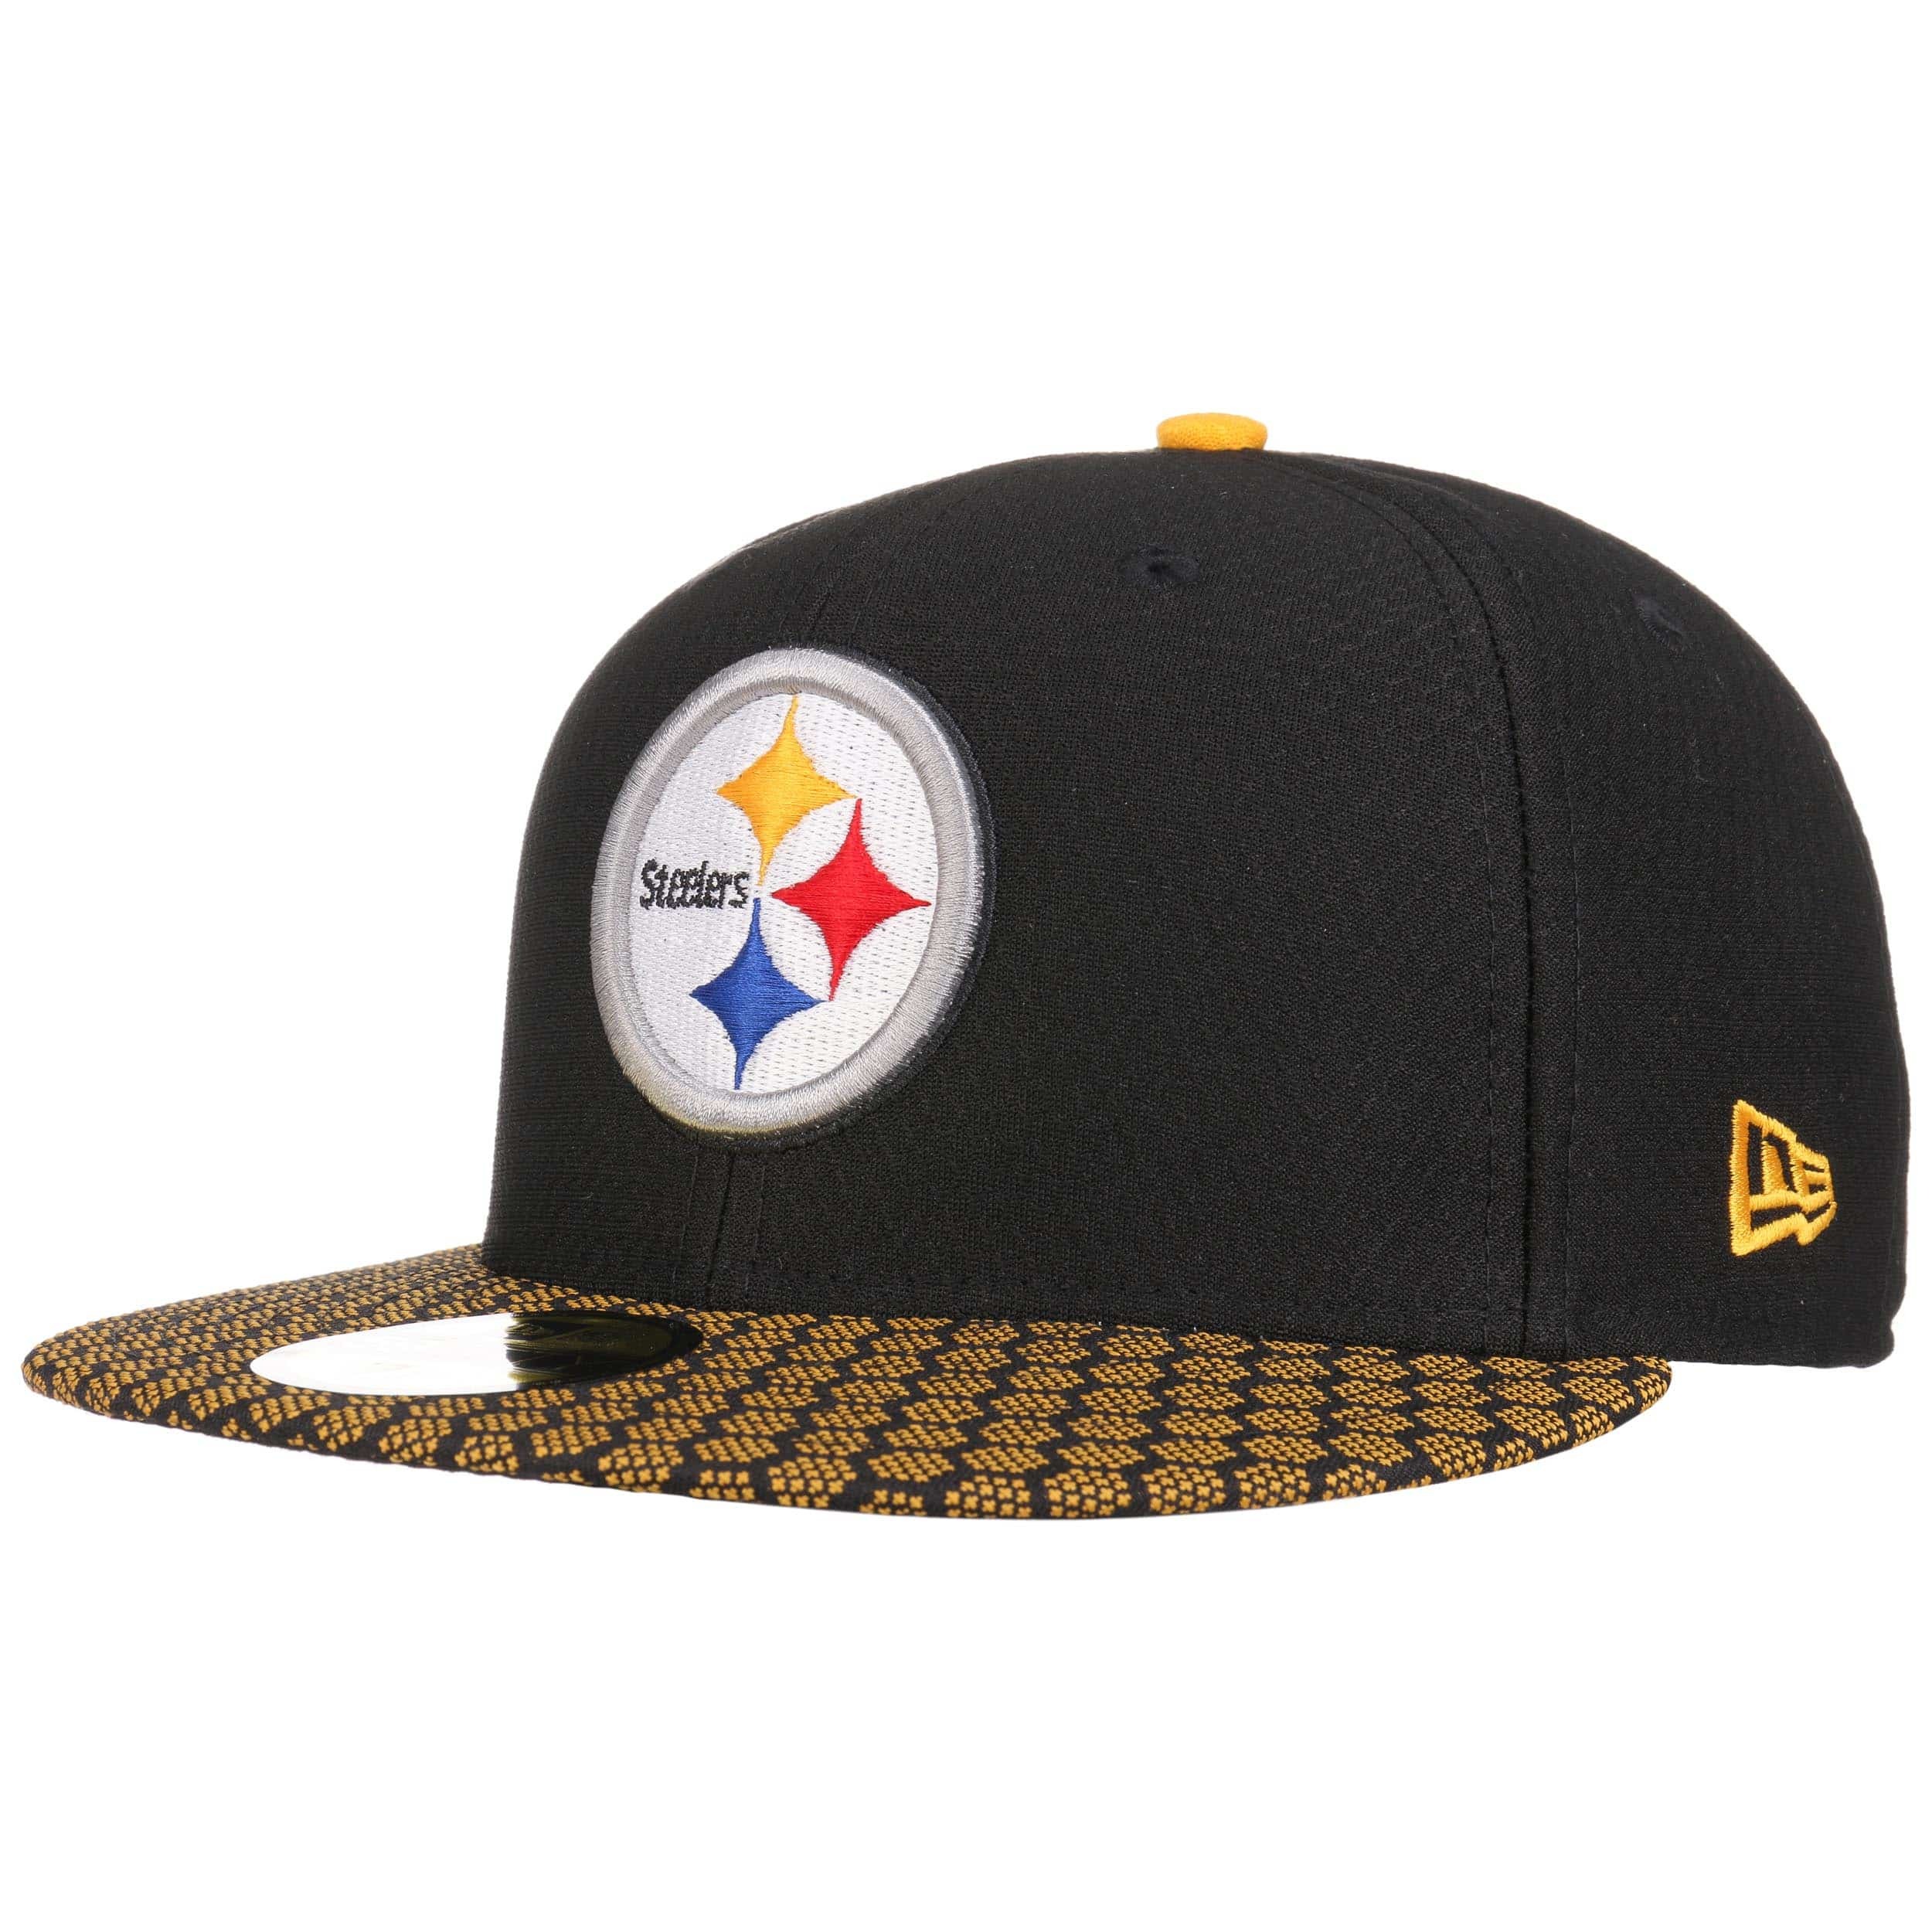 59Fifty ONF Steelers Cap by New Era 